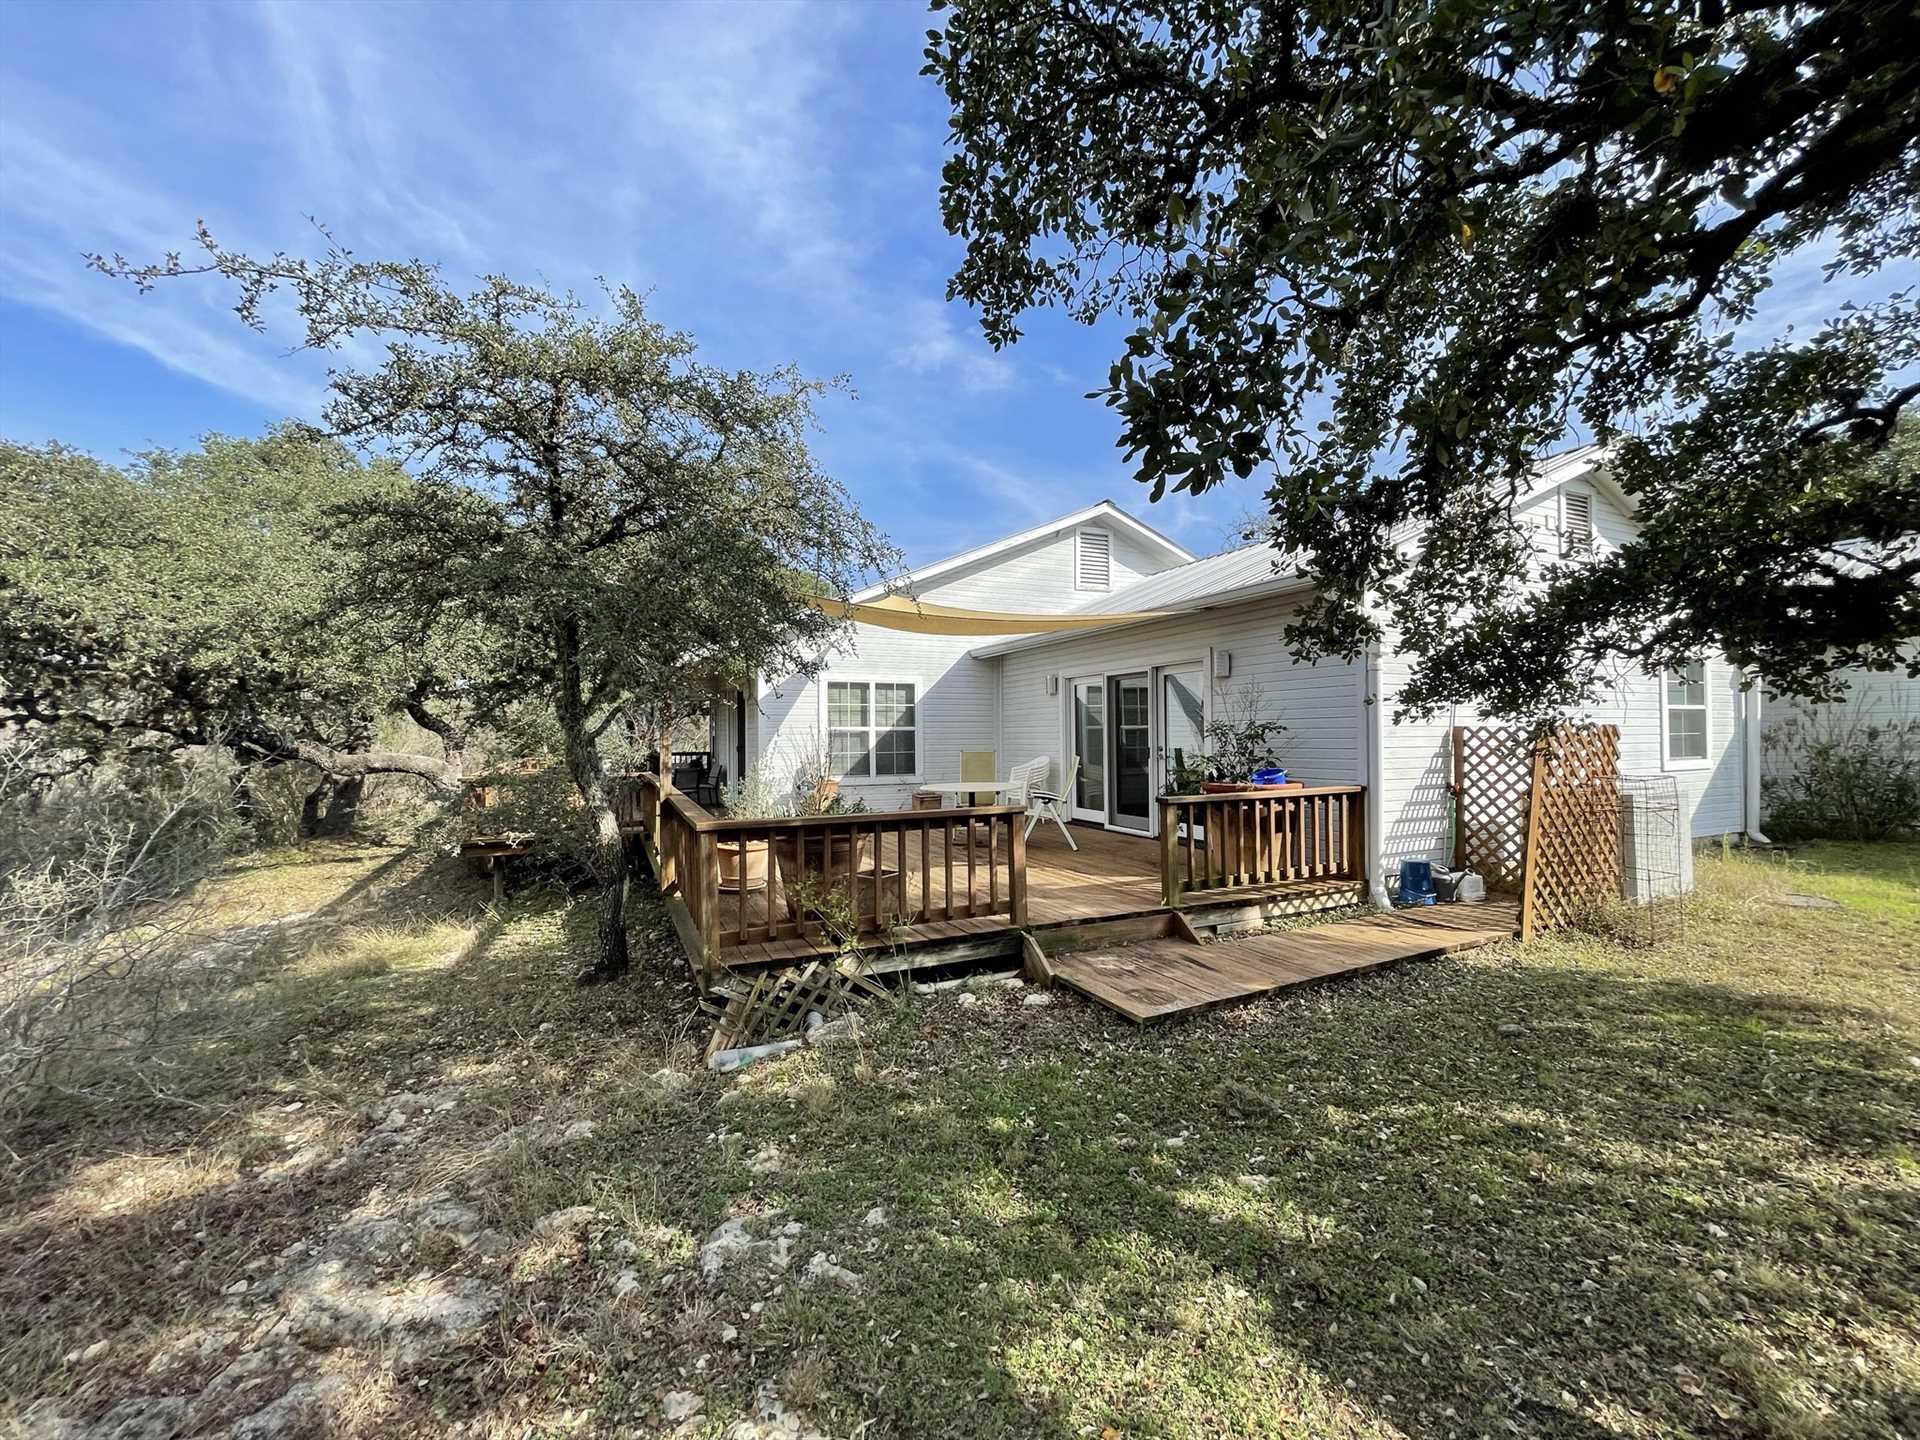                                                 There's no need to settle the next time you visit the Hill Country! Pamper your folks in the affordable country home of the Live Oak Cottage.